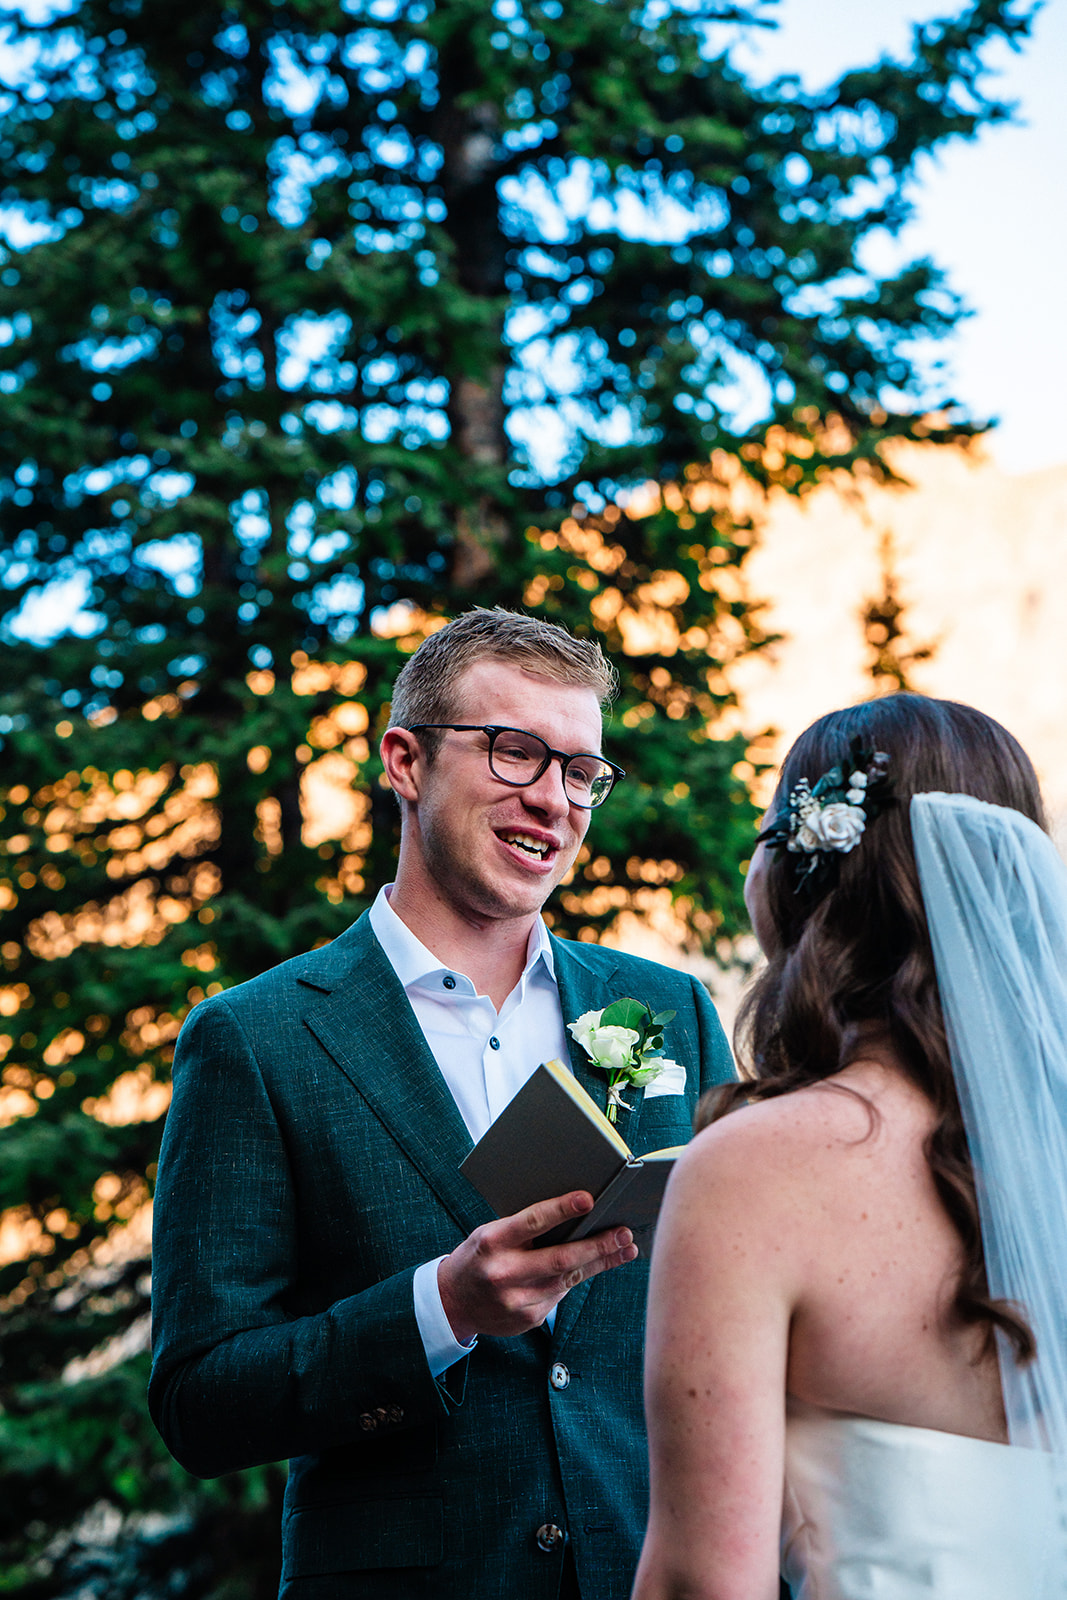 Intimate Vow Exchange with Bride and groom in Banff, Alberta Canada